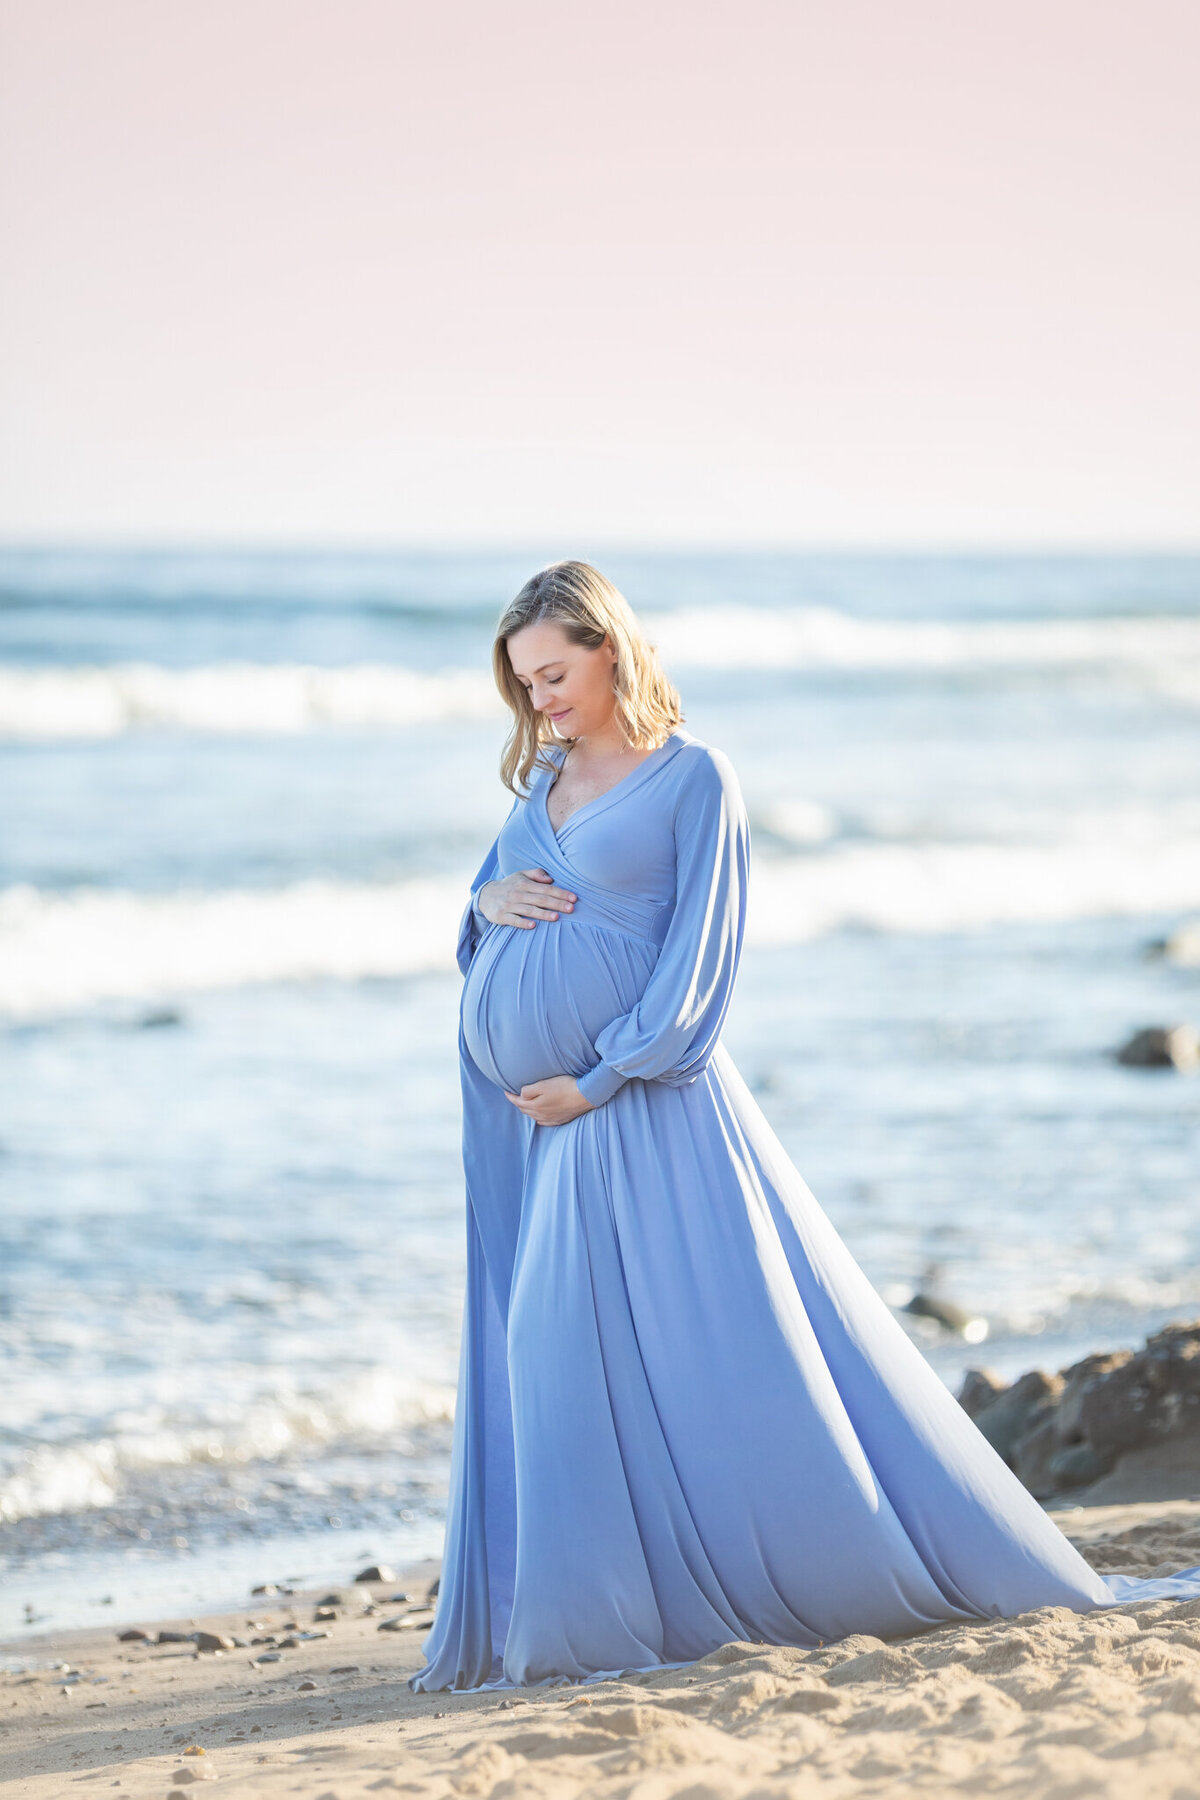 Mom to be in a beautiful pastel blue dress photographed looking at her baby bump in Malibu by the blue ocean